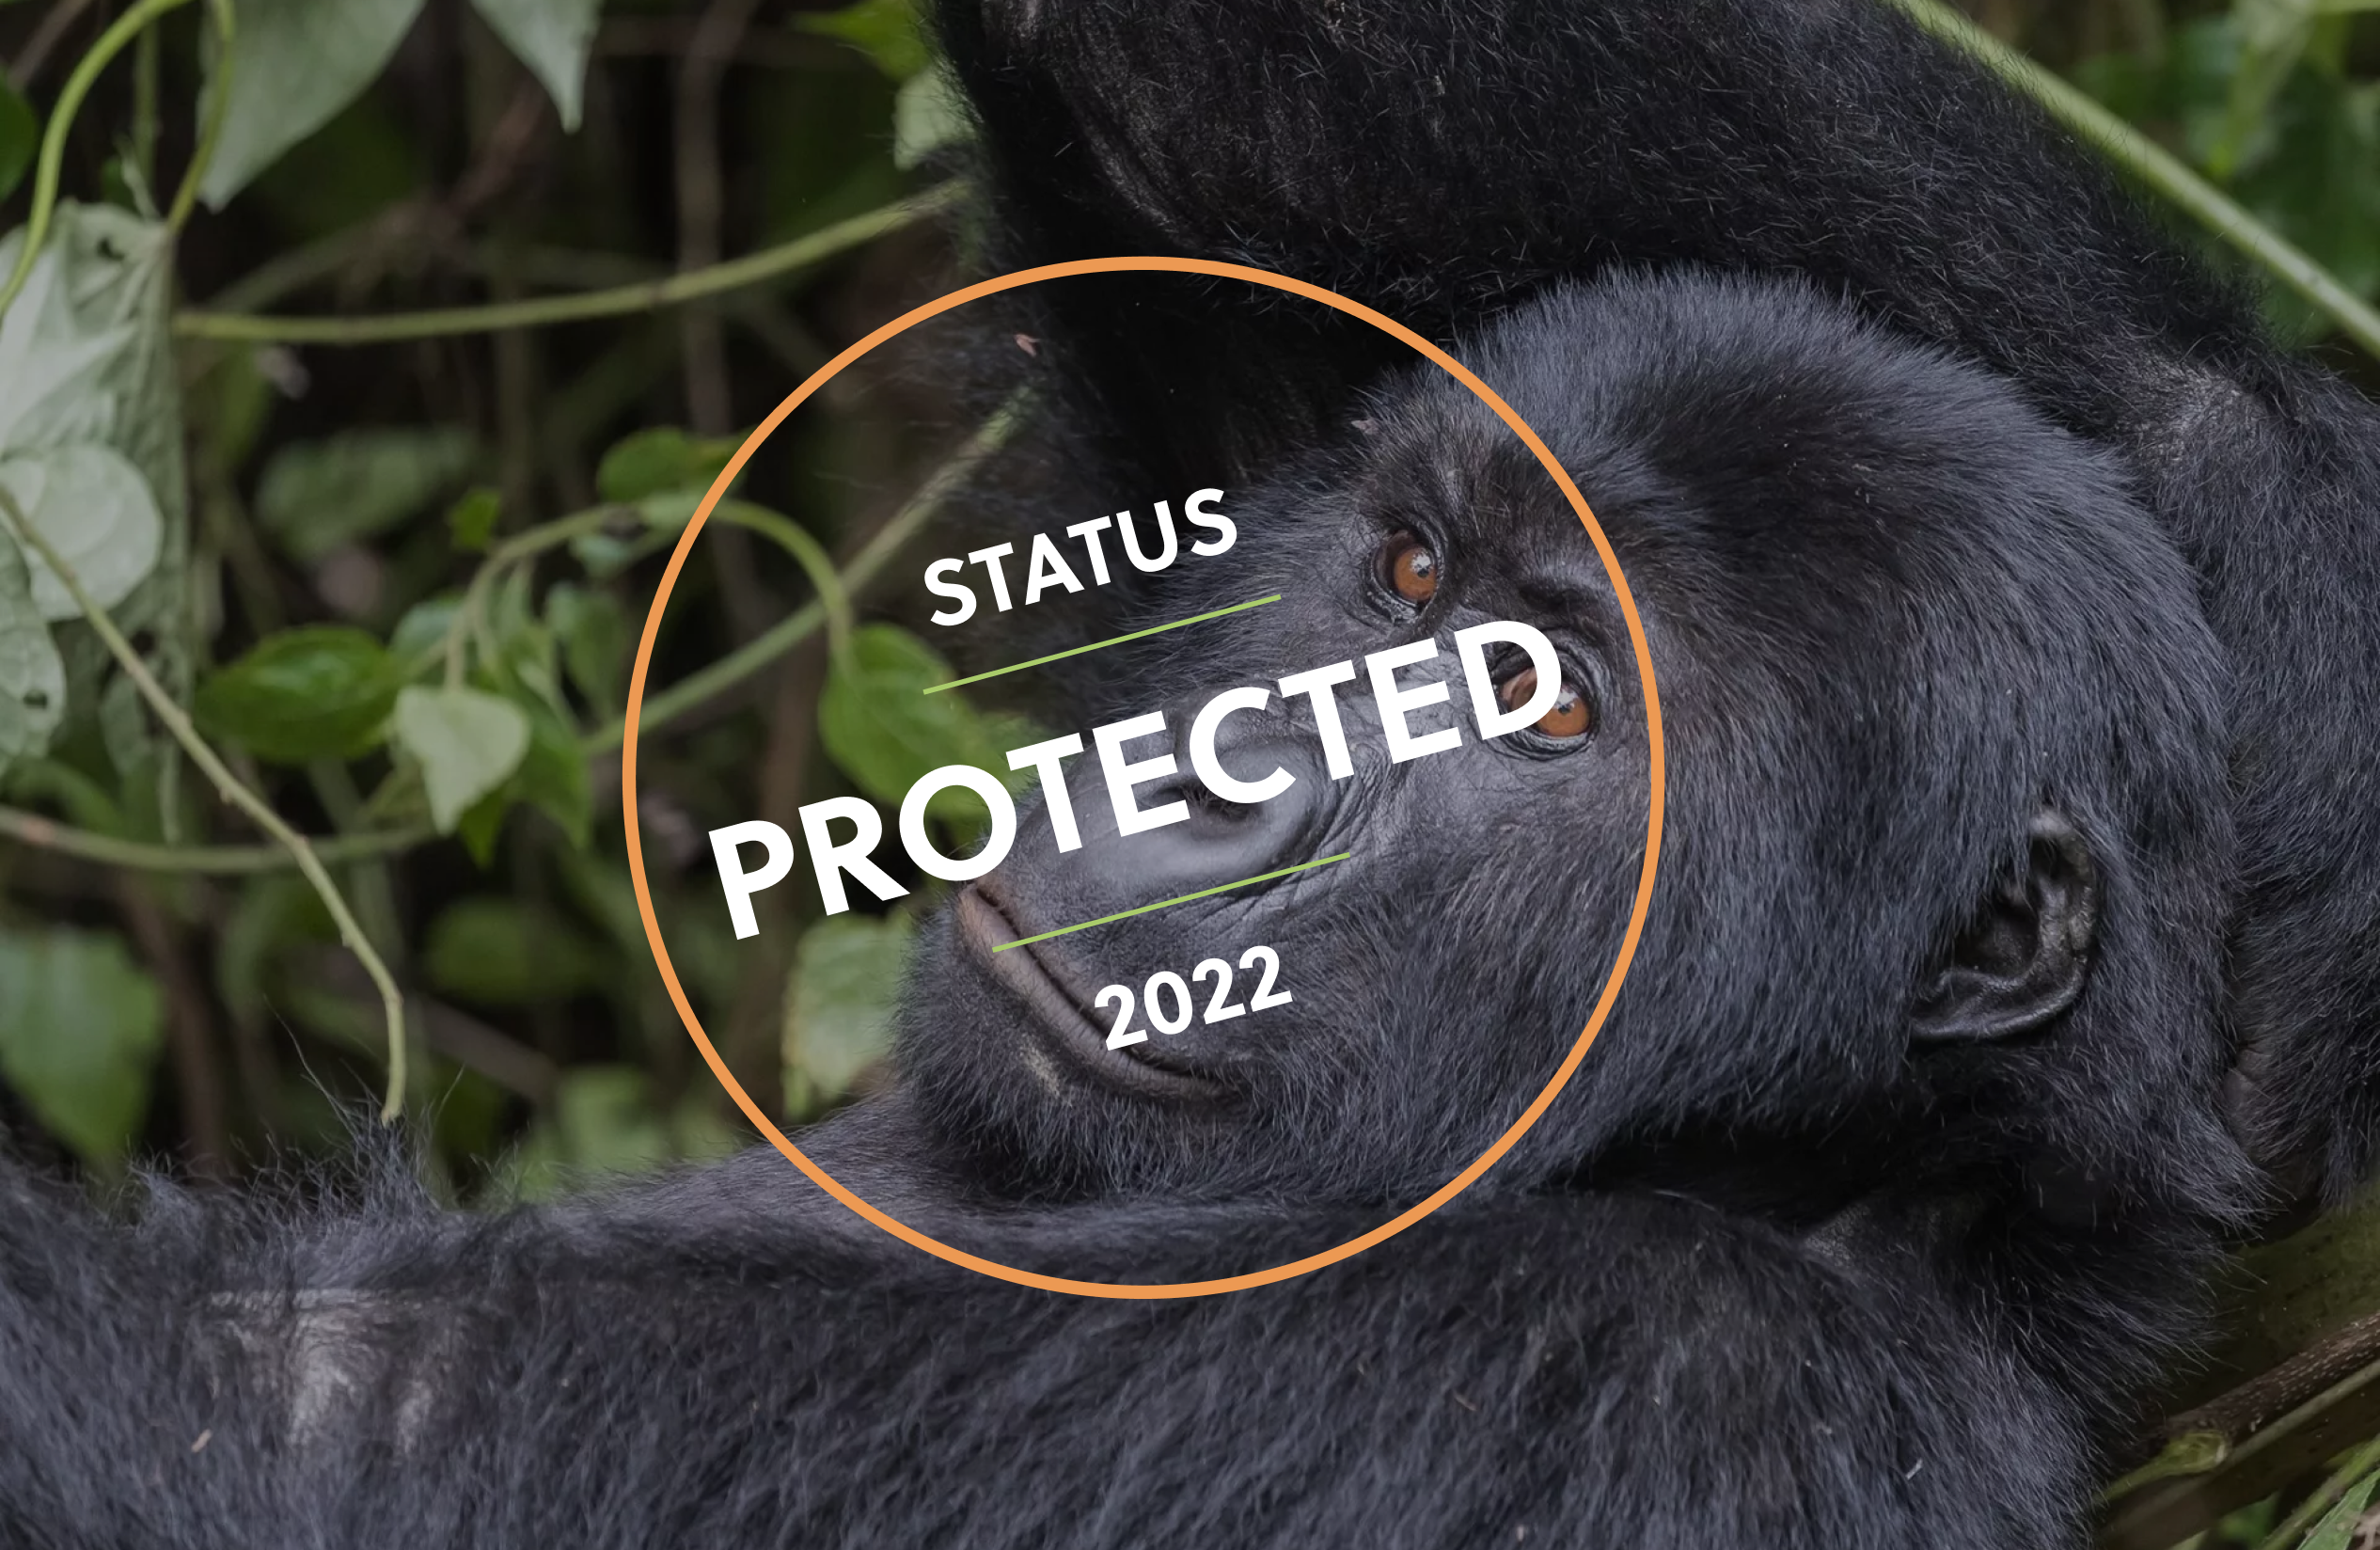 The rainforest trust protects the species